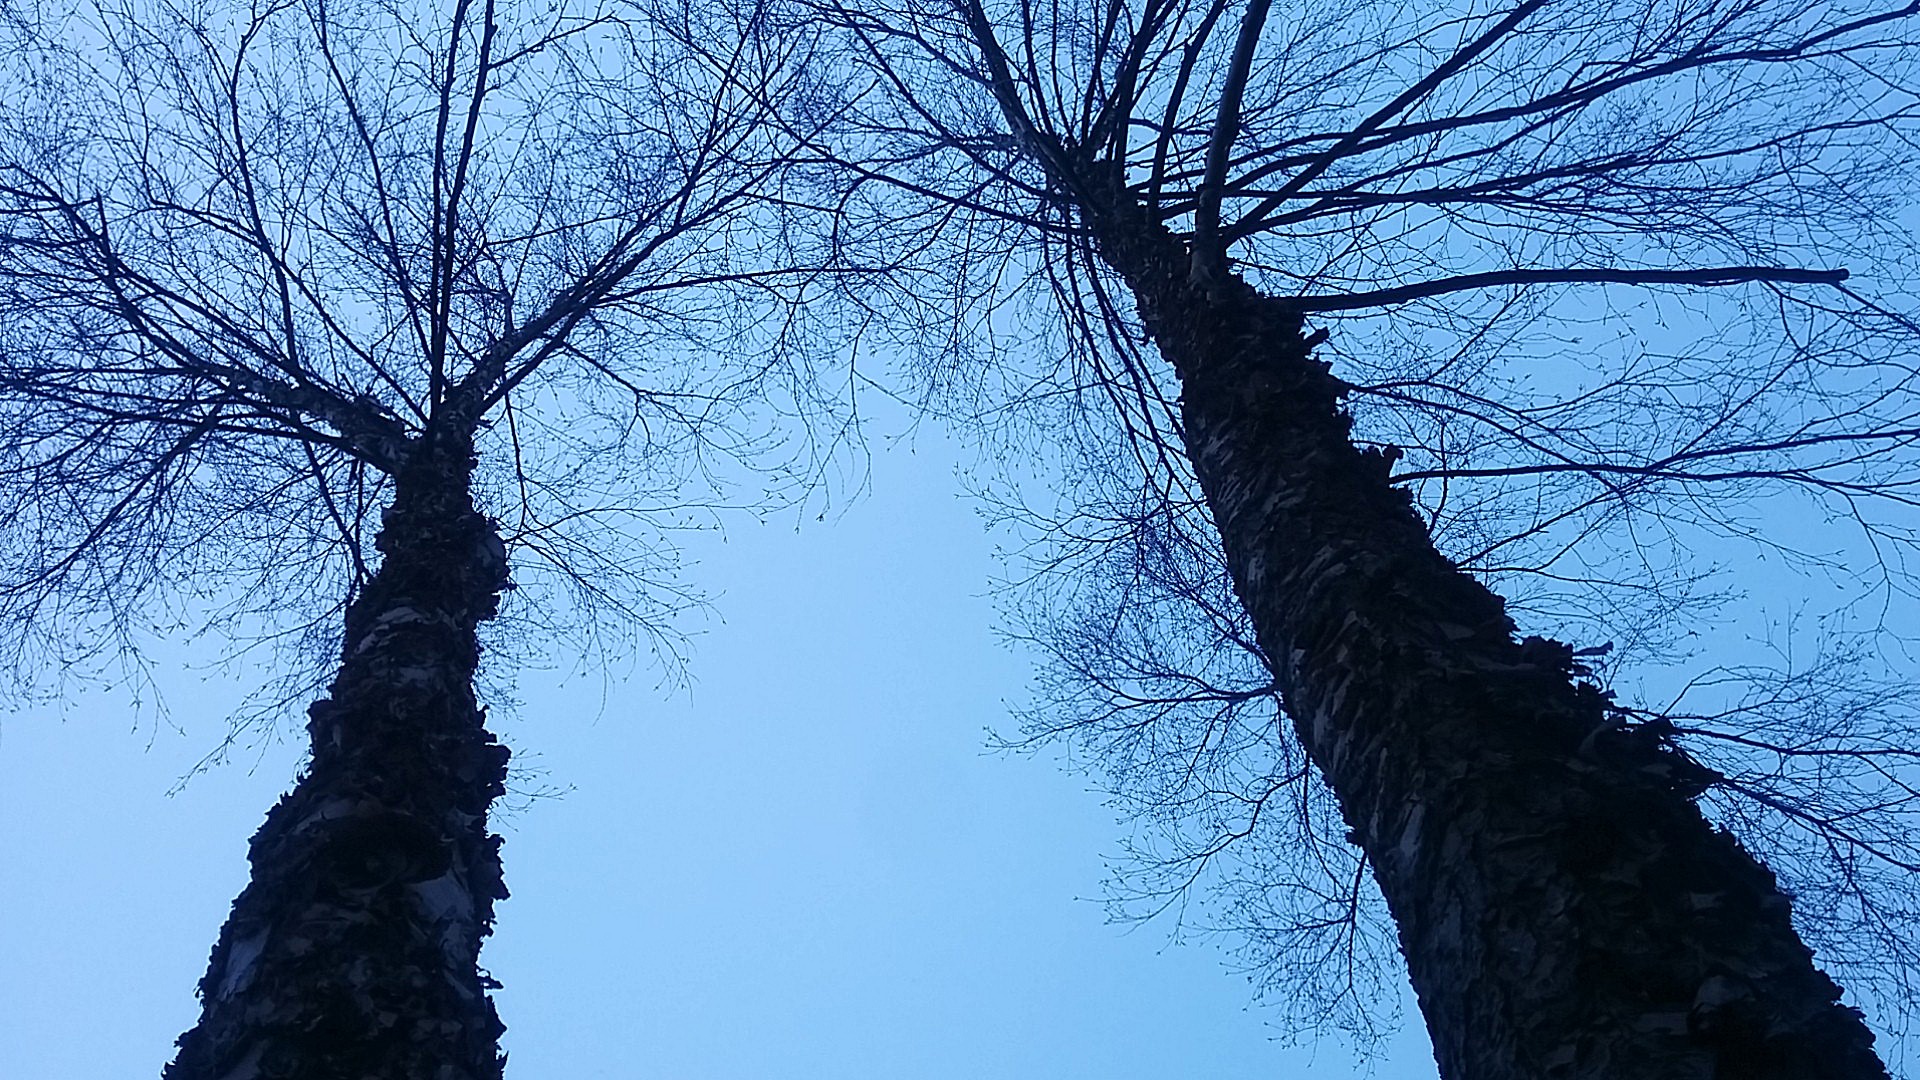 Looking up at two tall birch trees with peeling barks. Photo taken in Winter, so there are no leaves on the branches. The trees appear as silhouettes due to the low light of the evening. Their tops are visible, with branches extending from the barks.